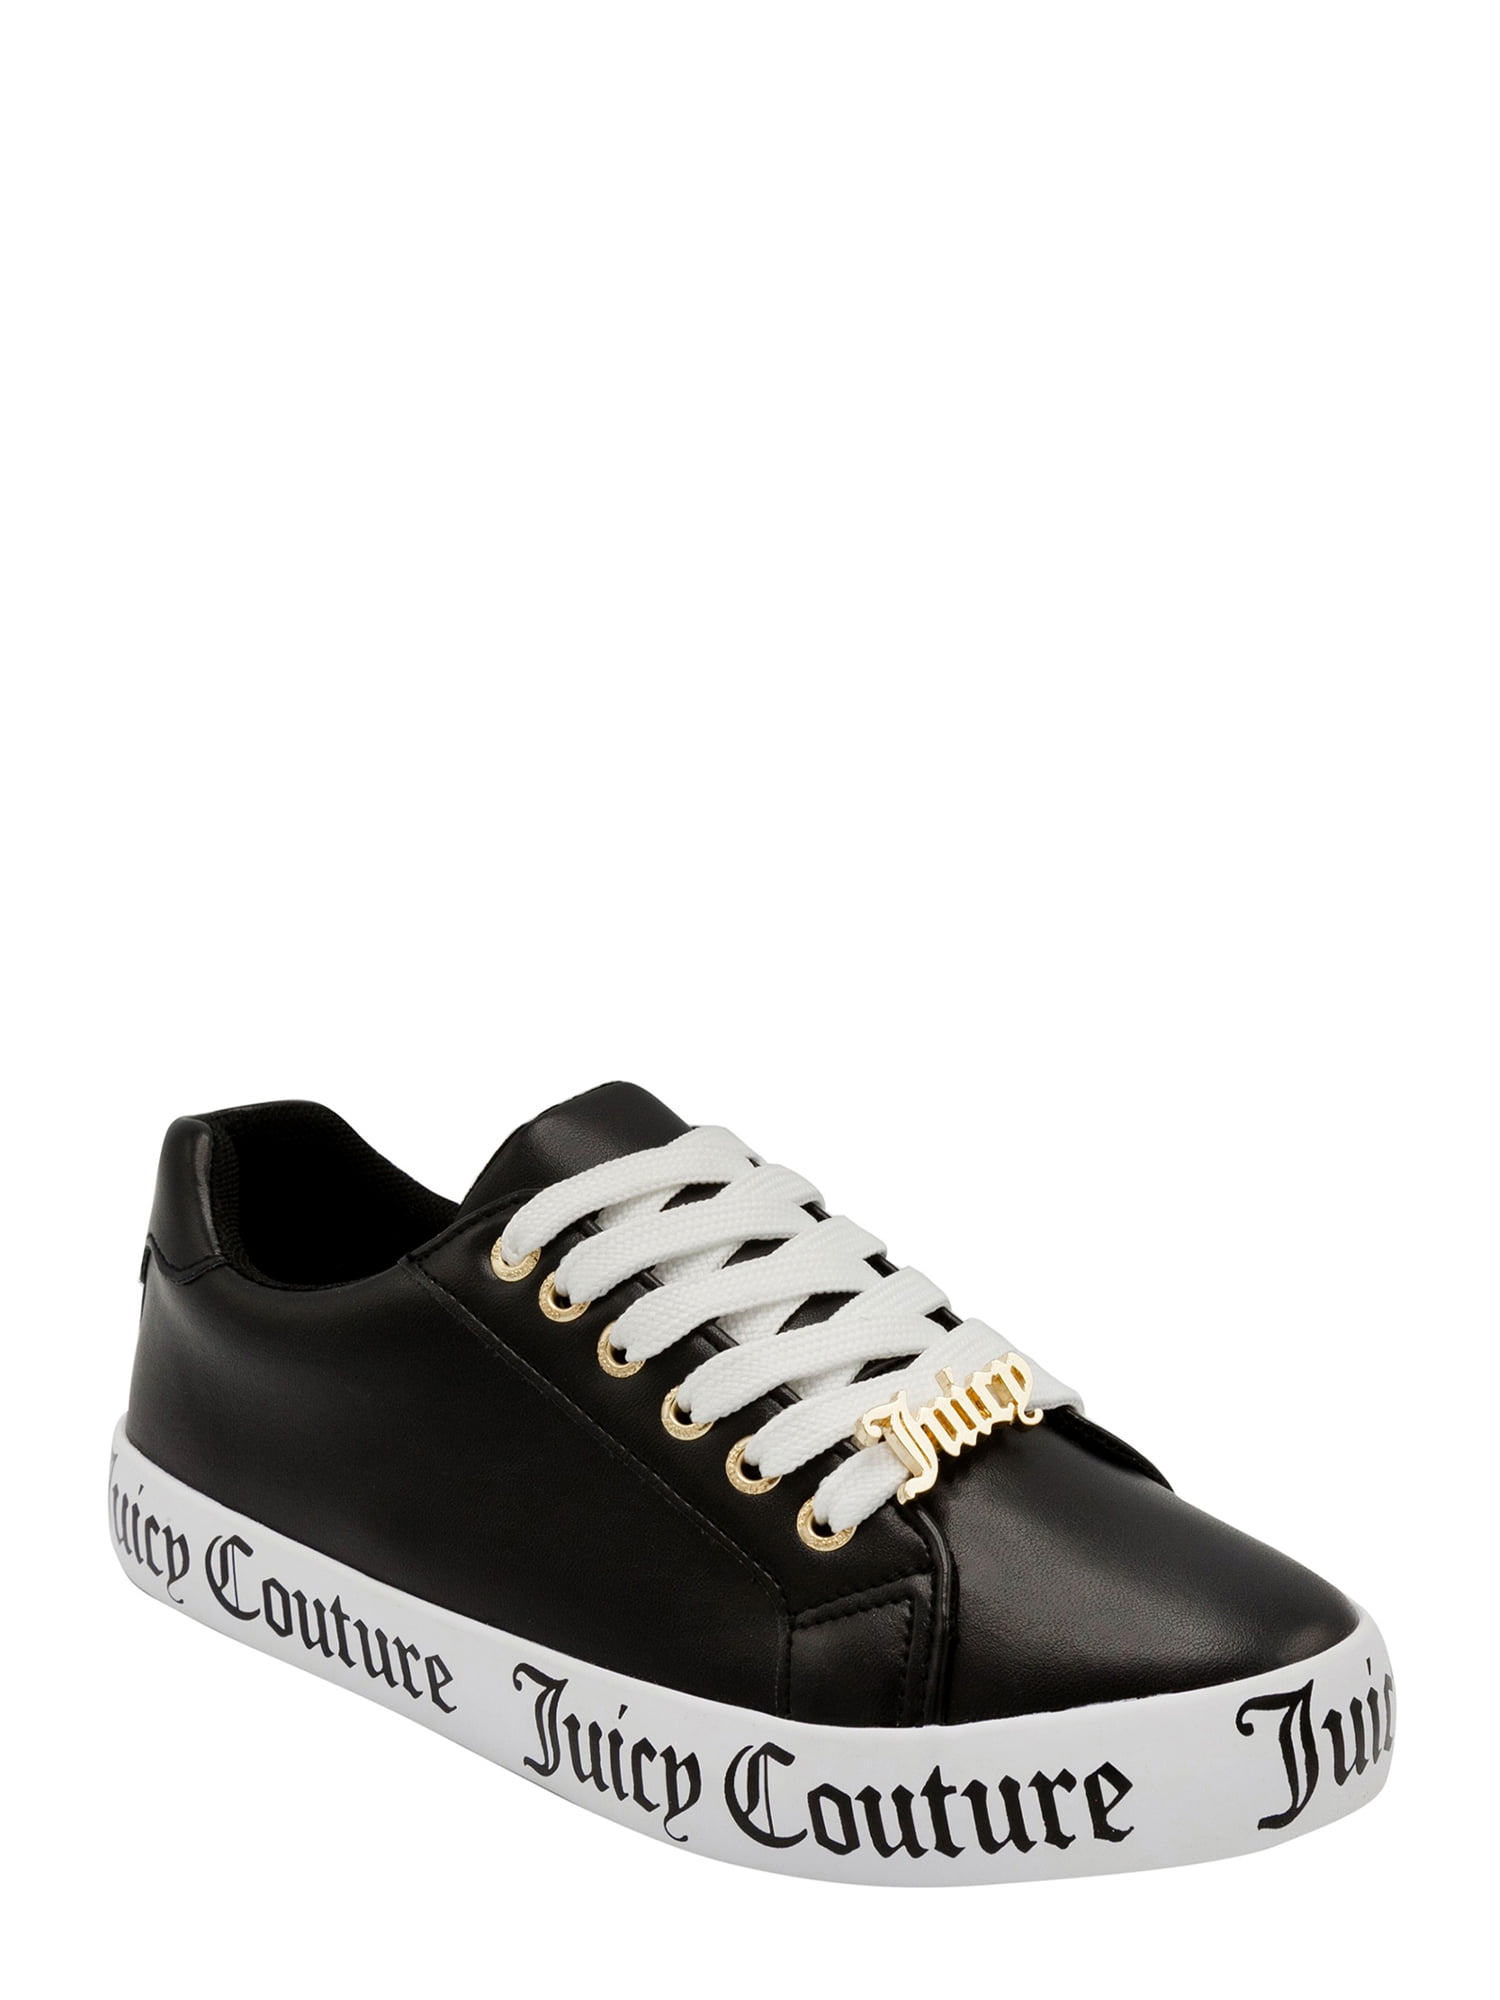 Juicy Couture Women s Chatter Sneaker with Juicy Logo 20634d81 713a 439a a651 179537a7d1bf.19a70d5547dd70745c4c641c2aaadac2